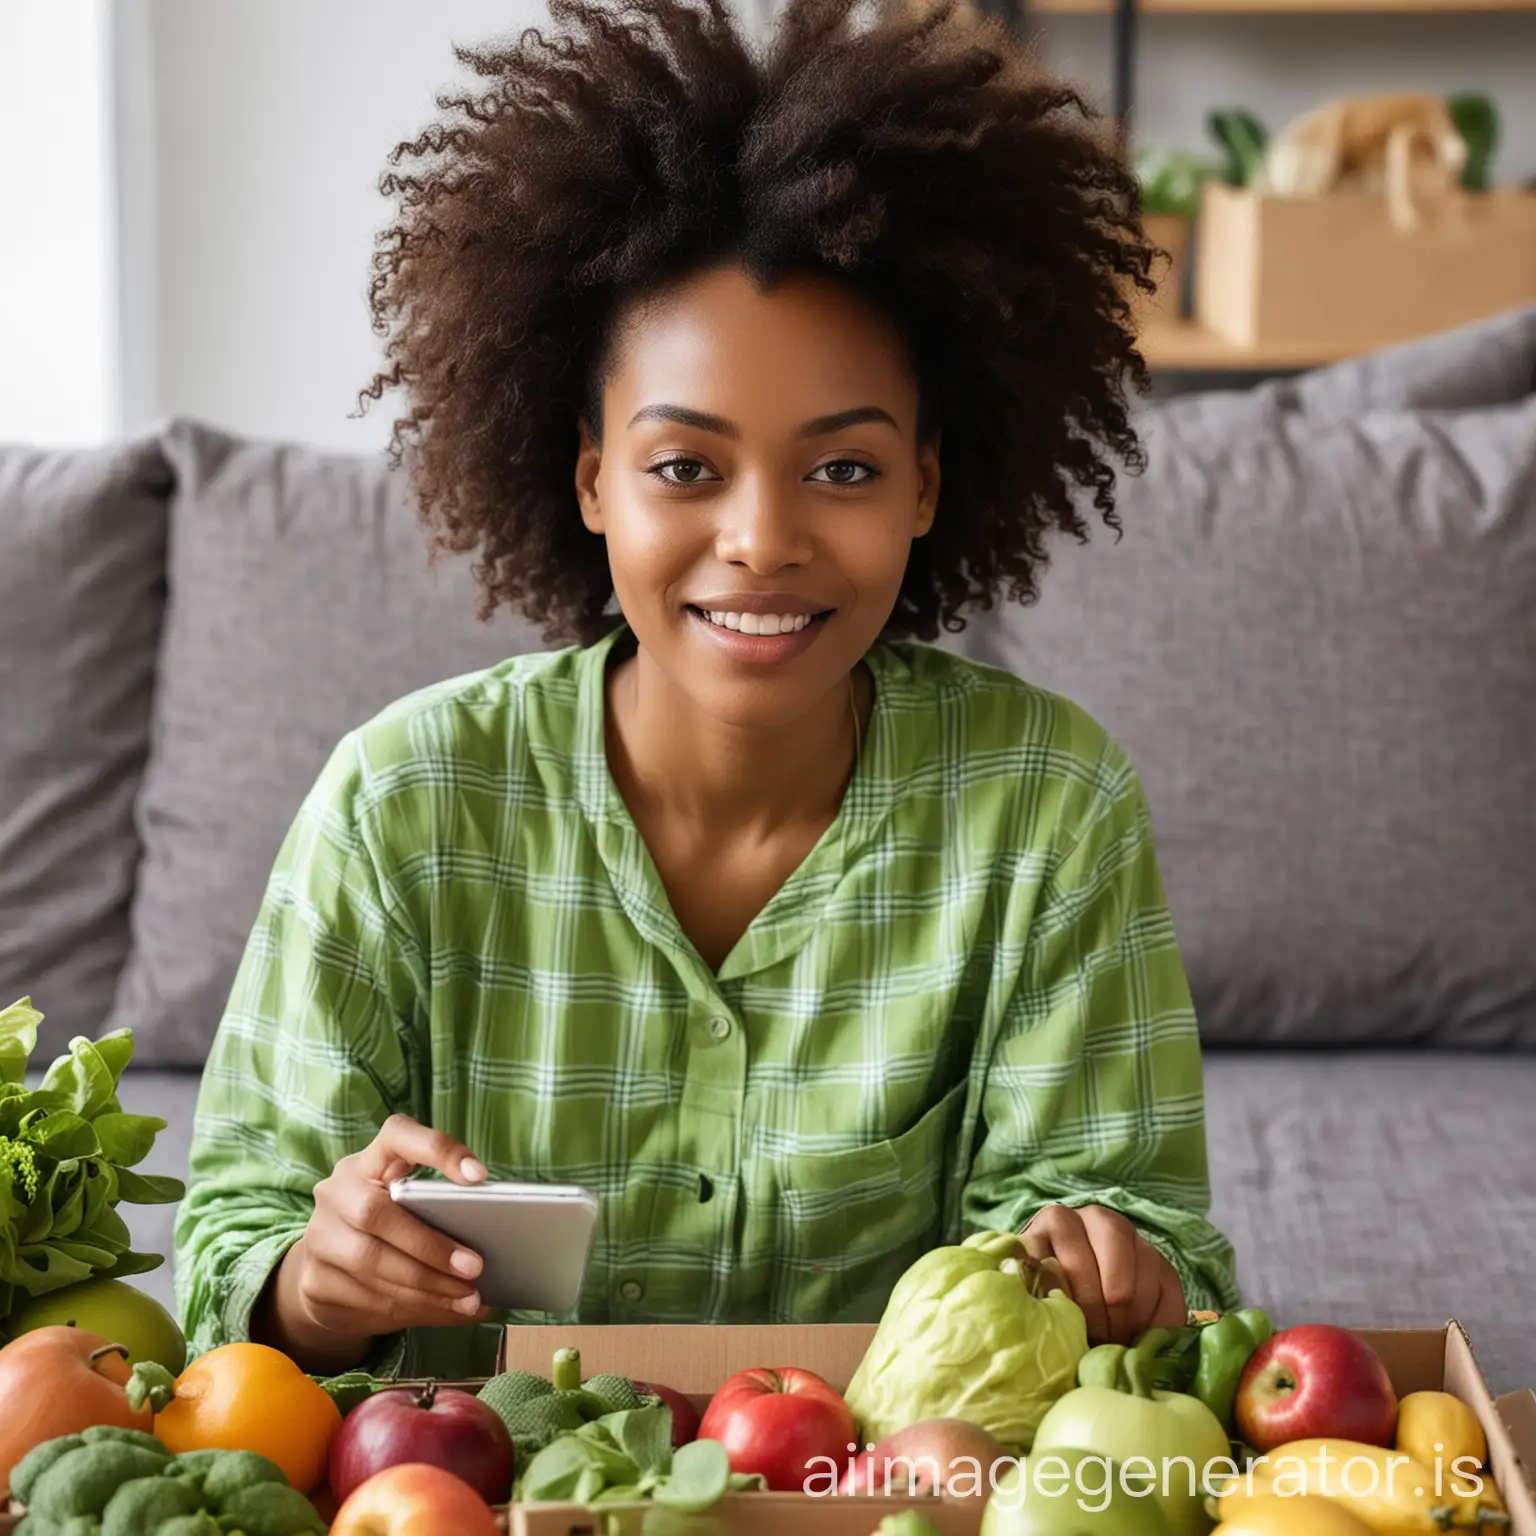 Close up of young African woman wearing green pajamas checks over her box full of colourful and fresh organic groceries ordered online with smartphone at home that have just been delivered